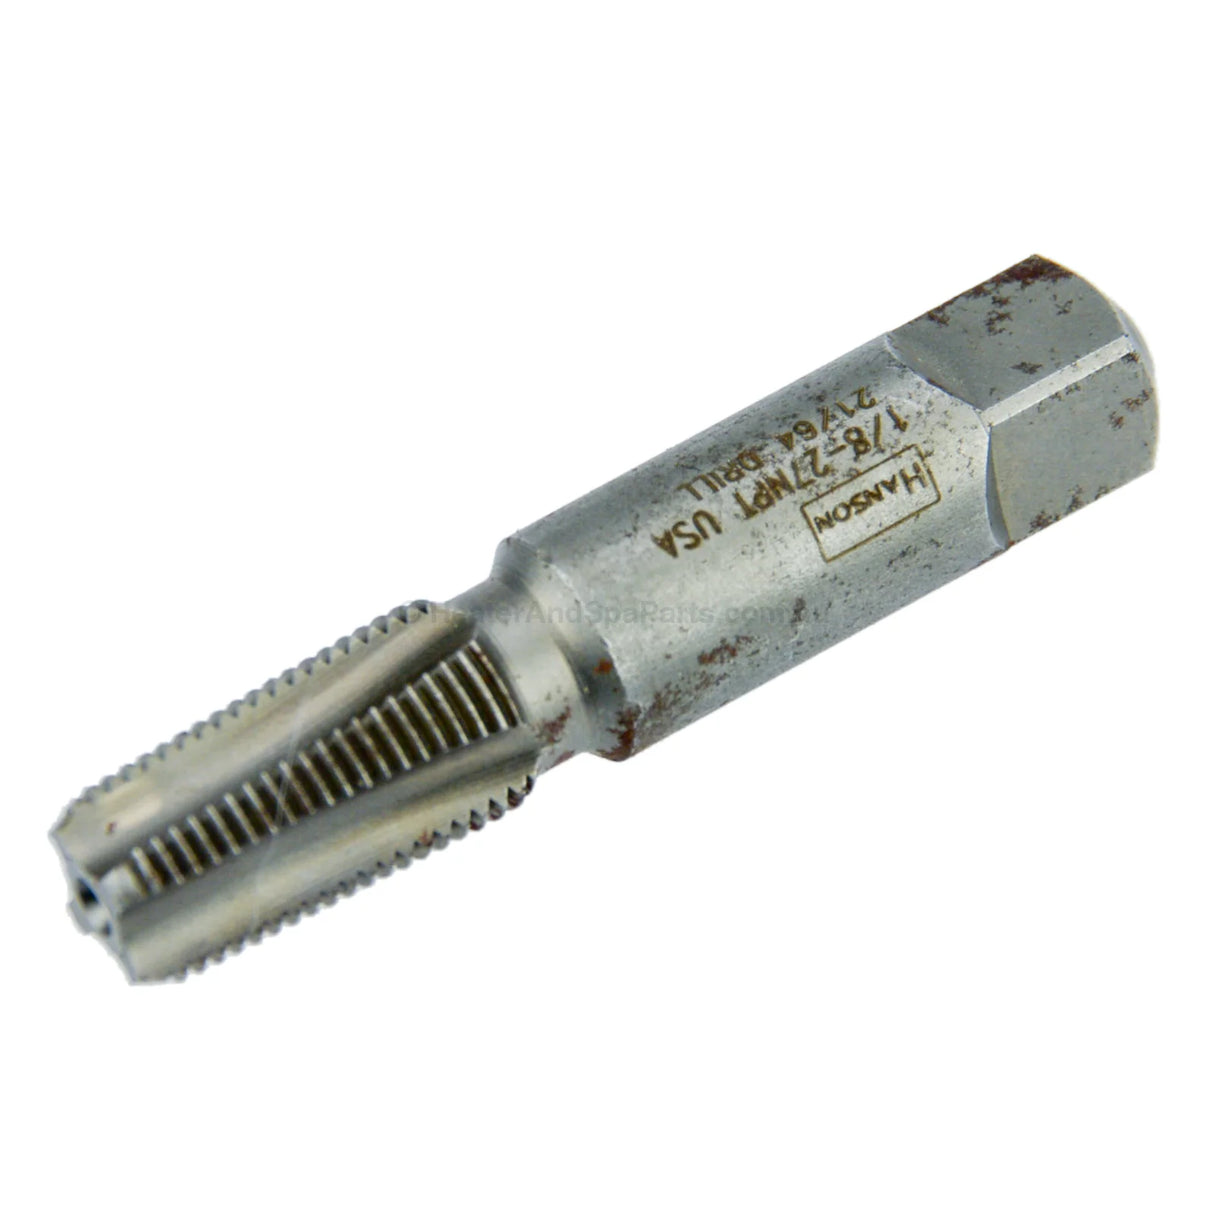 1/8" NPT Thread Tap - for current Pressure Switches - Heater and Spa Parts